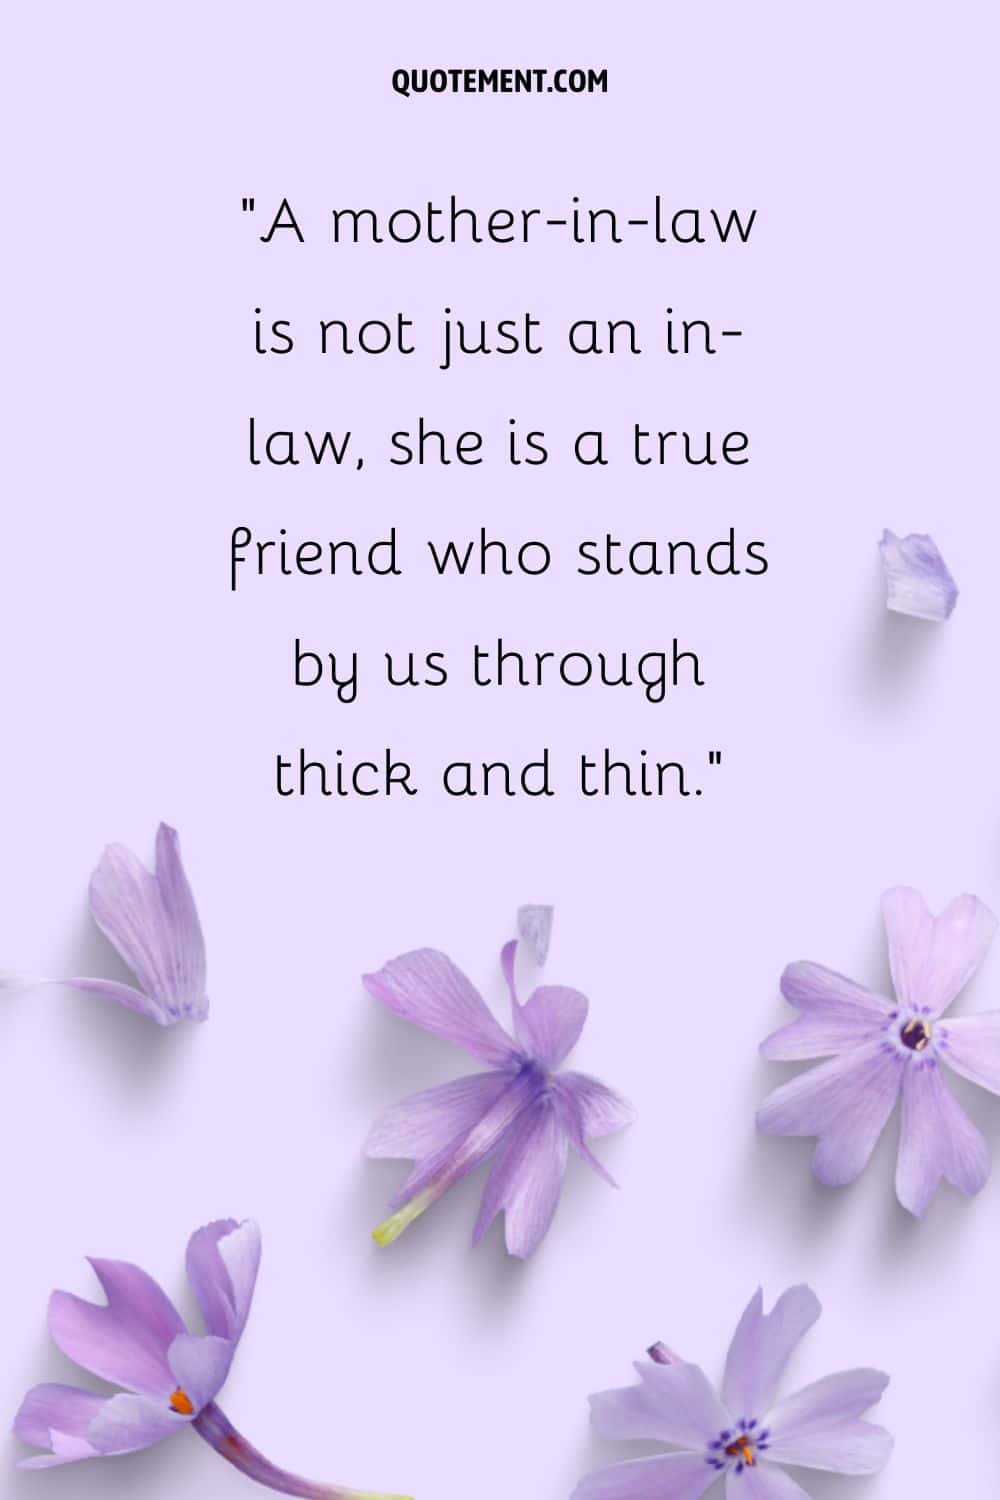 Quote about mom-in-law surrounded by lush purple blooms.